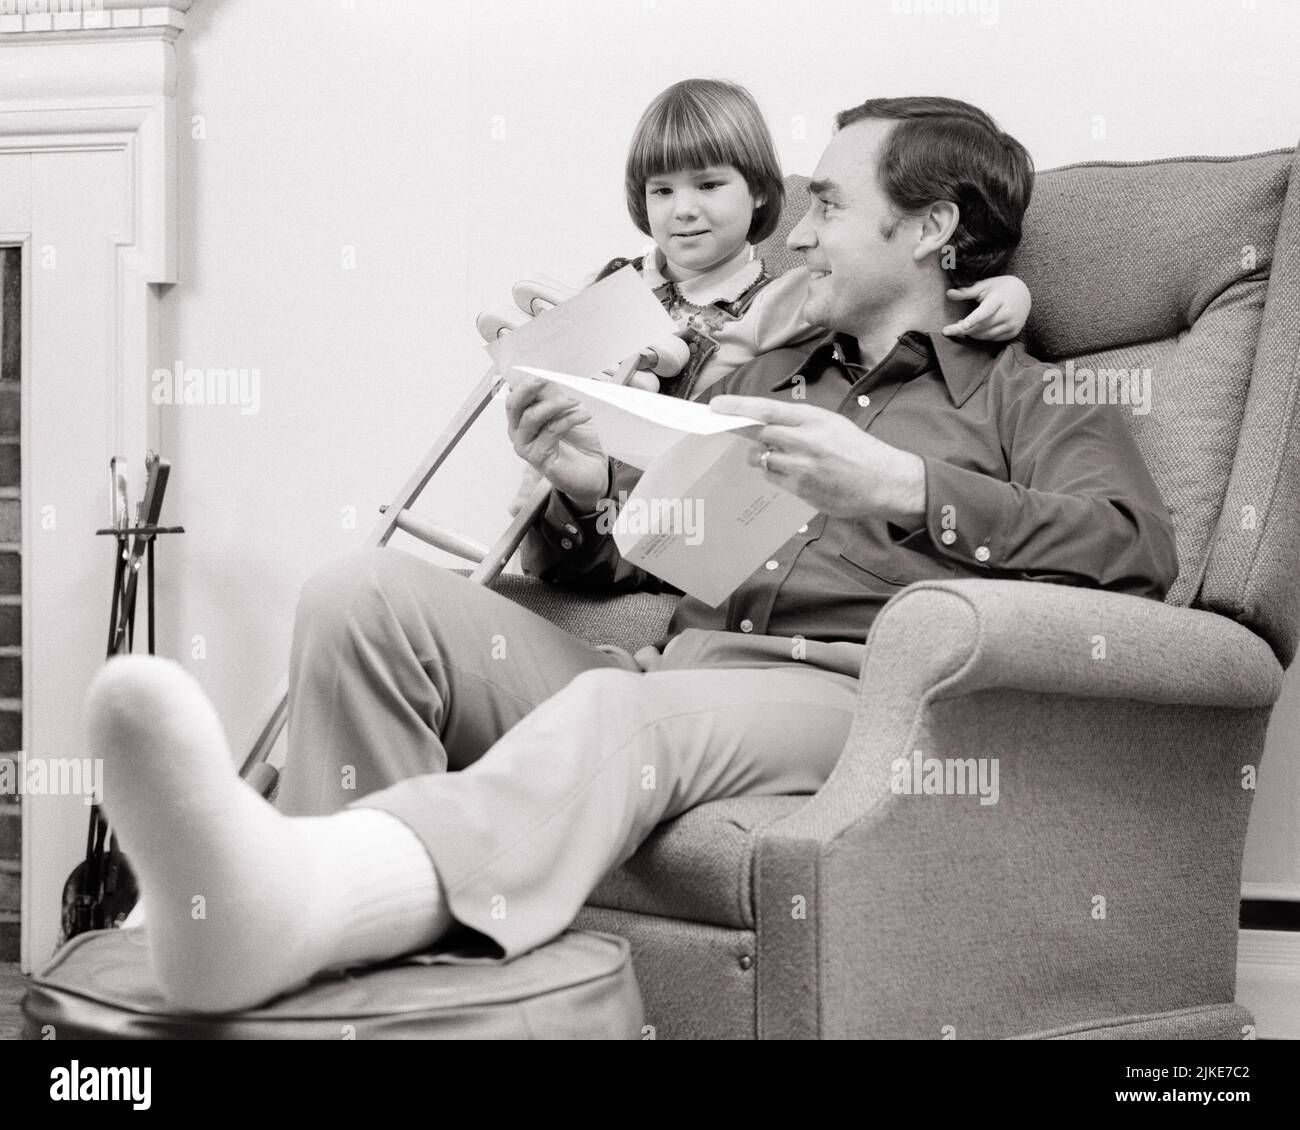 1970s FATHER SITTING INJURED FOOT ON OTTOMAN DAUGHTER HAS AN ARM AROUND DAD’S NECK HE HAS CRUTCH AND INSURANCE CHECK IN MAIL - j14016 HAR001 HARS JUVENILE INSURANCE COMMUNICATION NECK PLEASED JOY LIFESTYLE SATISFACTION FEMALES INJURED HOME LIFE COPY SPACE FRIENDSHIP HALF-LENGTH DAUGHTERS PERSONS MALES FATHERS B&W HAPPINESS CHEERFUL AND DADS LOW ANGLE PAYMENT SMILES CONNECTION CONCEPTUAL JOYFUL OTTOMAN HE CRUTCH JUVENILES MID-ADULT MID-ADULT MAN TOGETHERNESS BLACK AND WHITE CAUCASIAN ETHNICITY HAR001 OLD FASHIONED Stock Photo